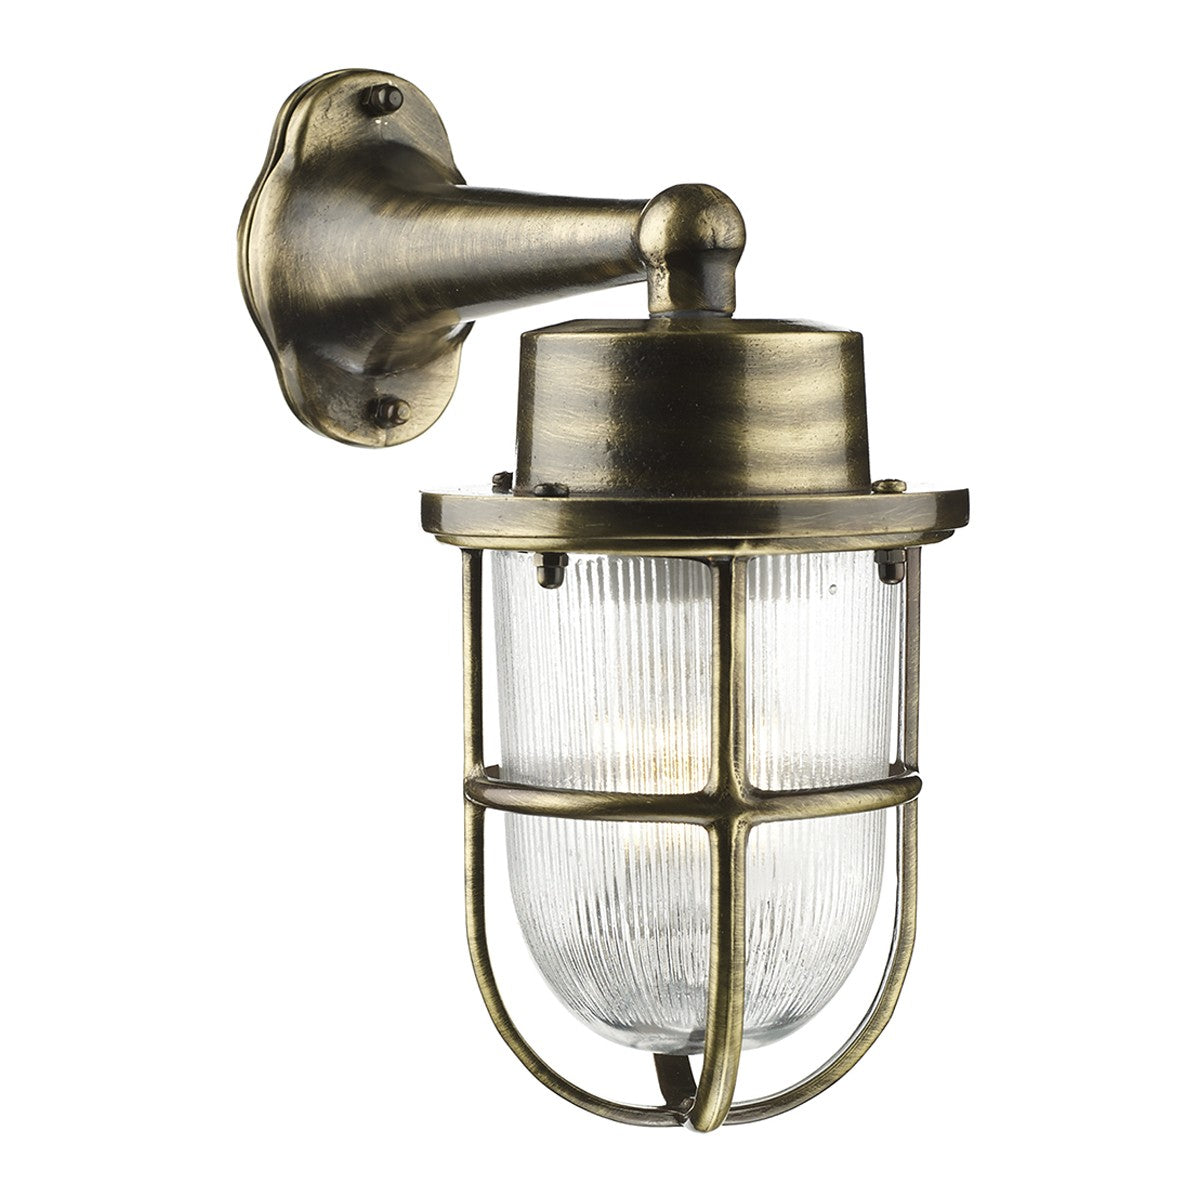 Harbour Wall Light Antique Brass HAR1575 - The Light Company